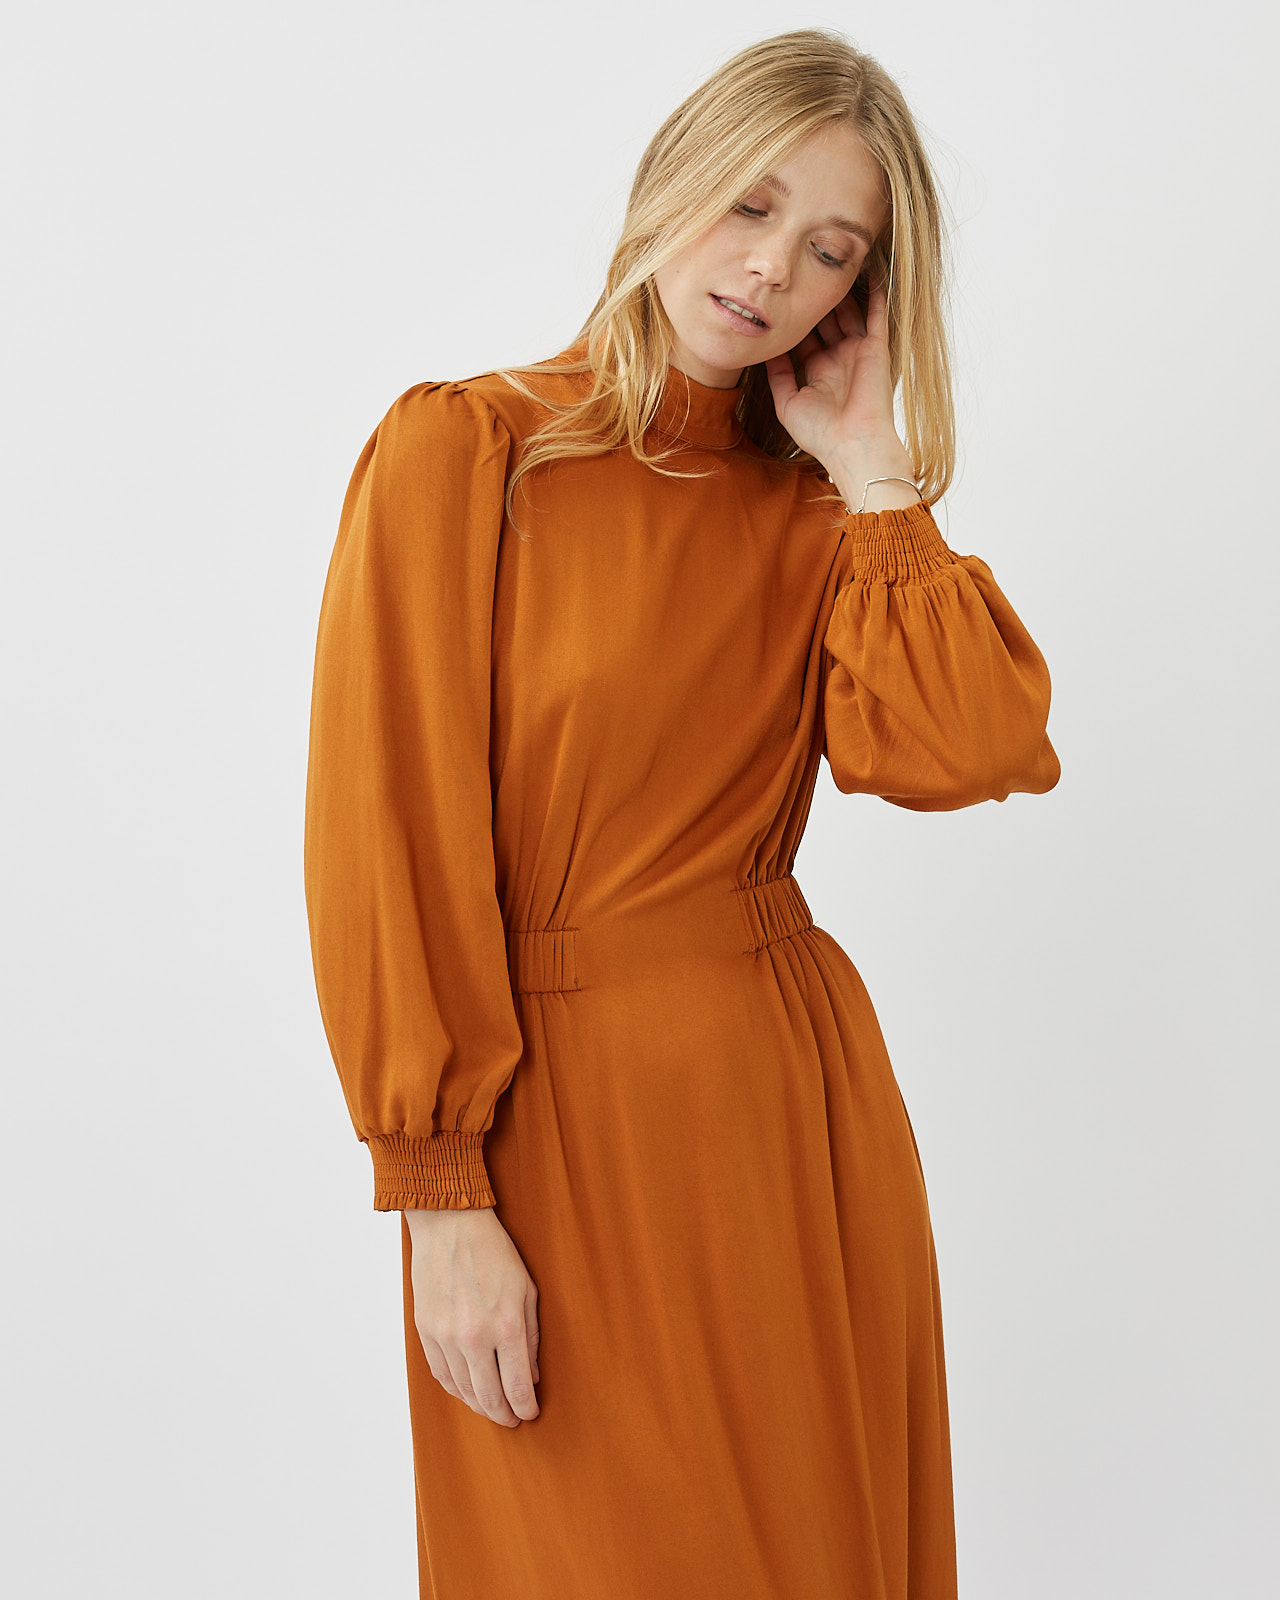 Minimum Women's Larada Midi Dress in Roasted Pecan worn by a model posing with her hand touching her ear